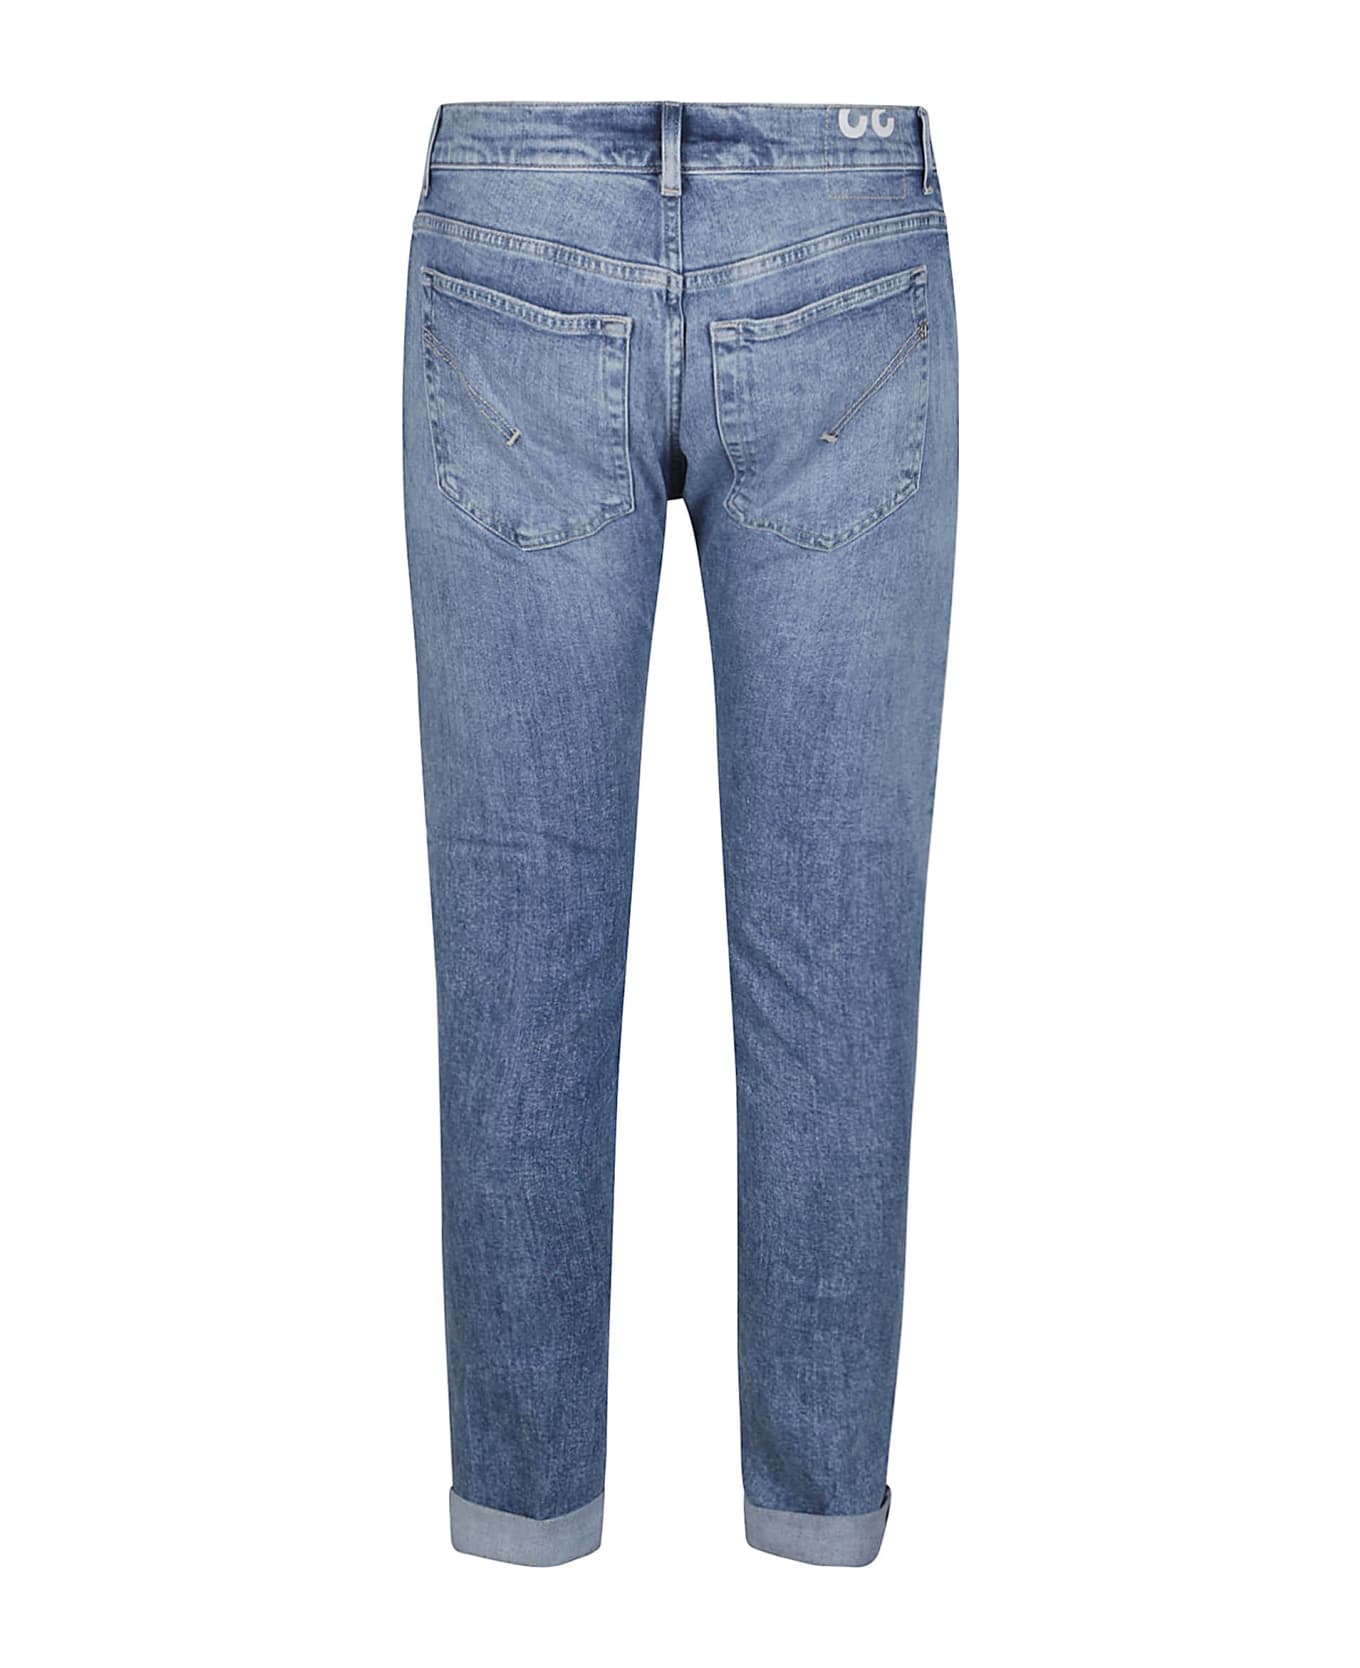 Dondup Ritchie Jeans - Blue Denim ボトムス